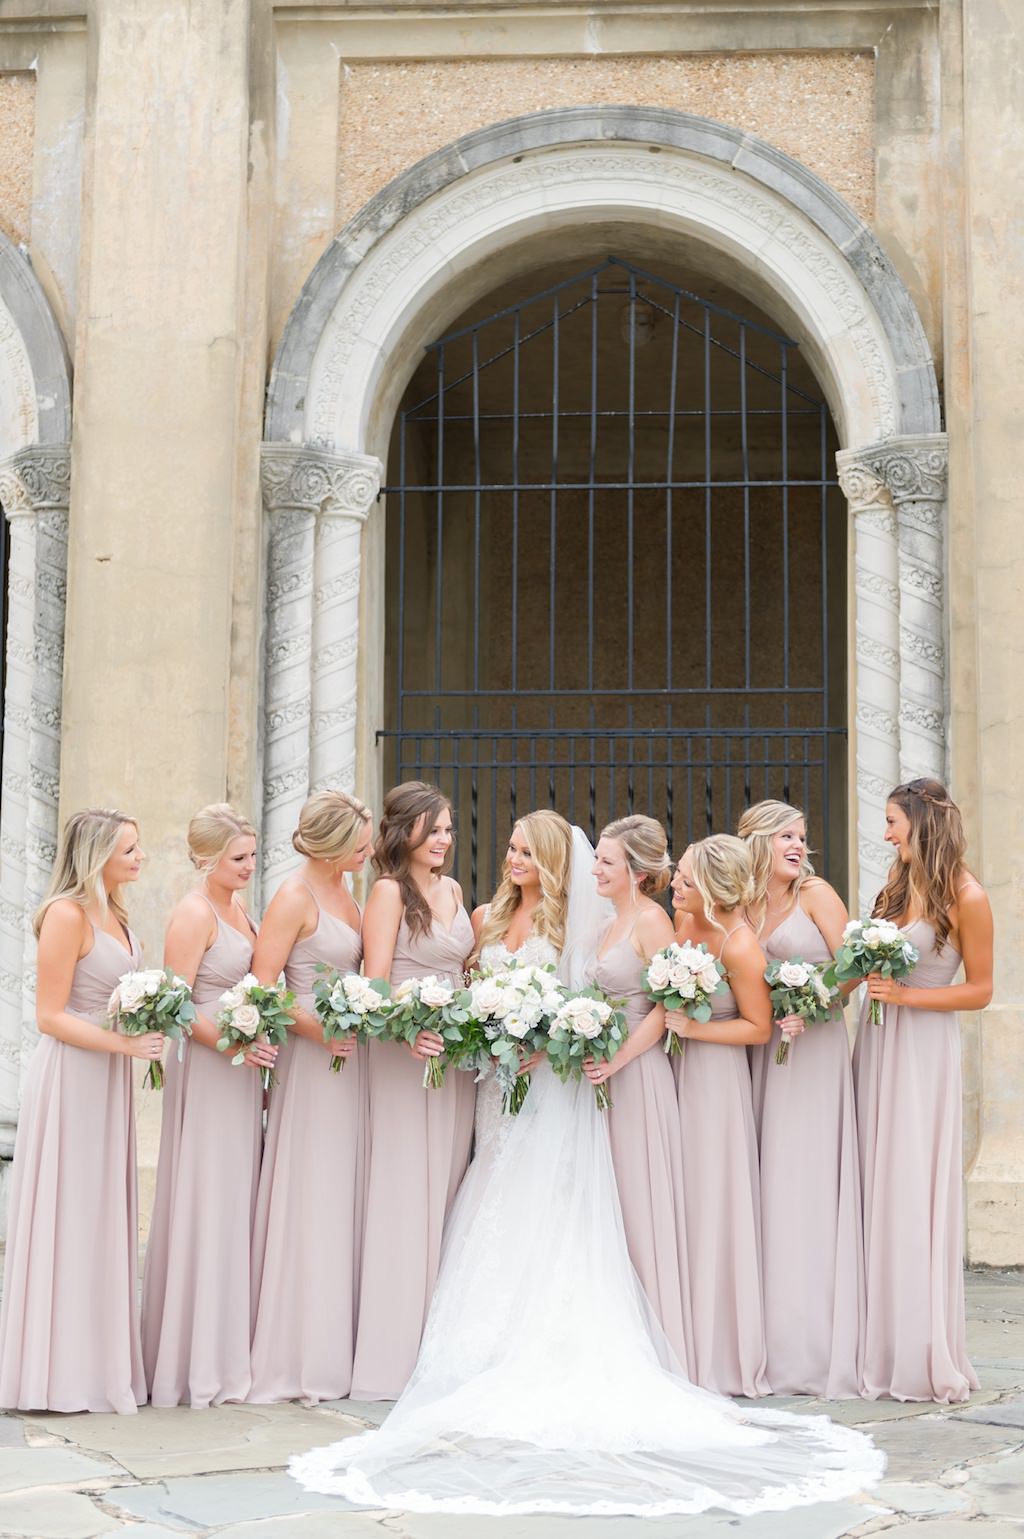 Outdoor Bride and Bridesmaids Wedding Portrait, Bridesmaids in Vintage Rose Matching Dresses and White Rose and Greenery Bouquets | Tampa Bay Photographer Andi Diamond Photography | Hair and Makeup Michele Renee the Studio